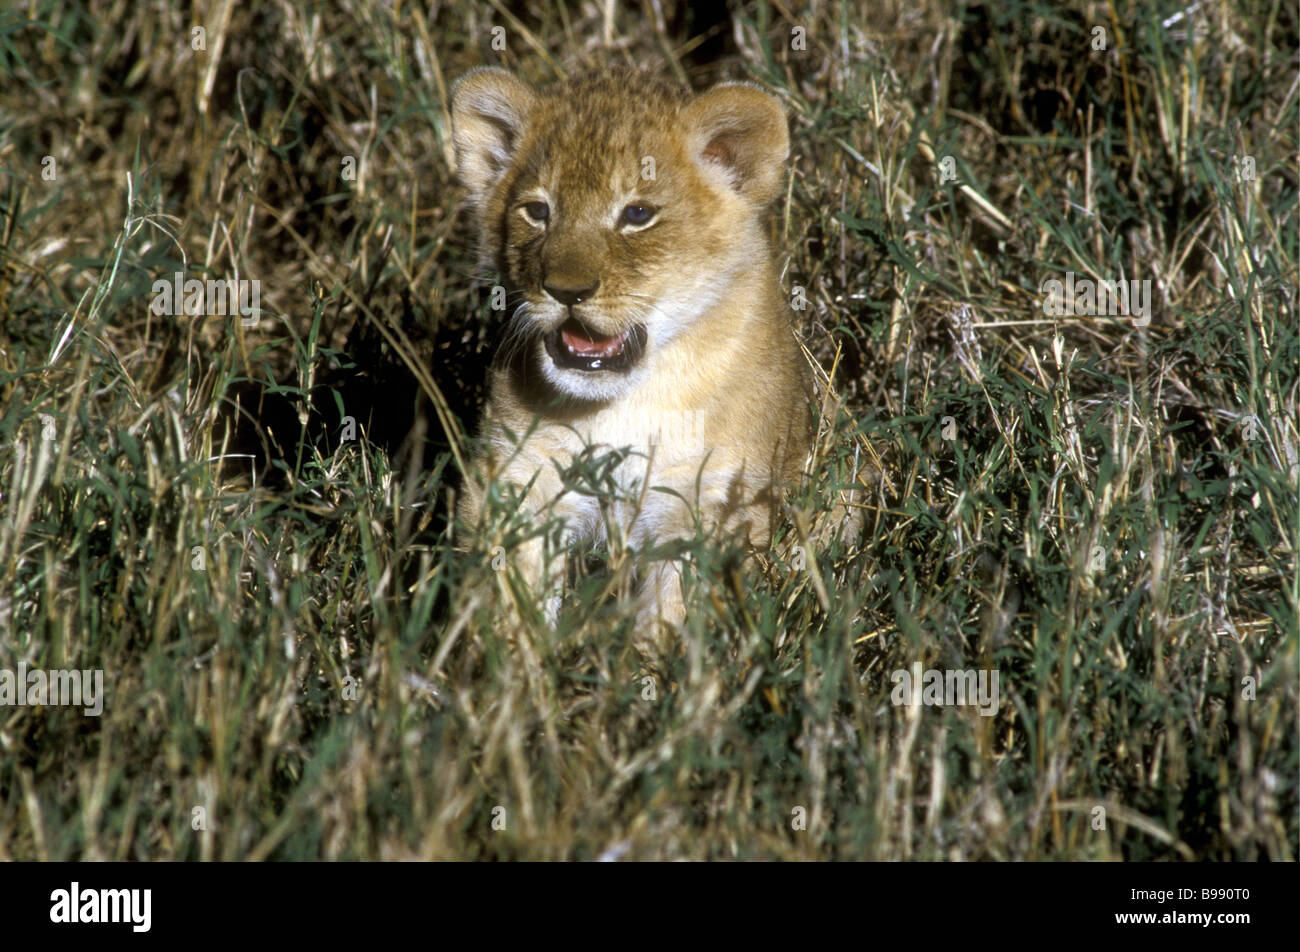 Very young lion cub about three weeks old sitting in grass Note his blue eyes Masai Mara National Reserve Kenya East Africa Stock Photo